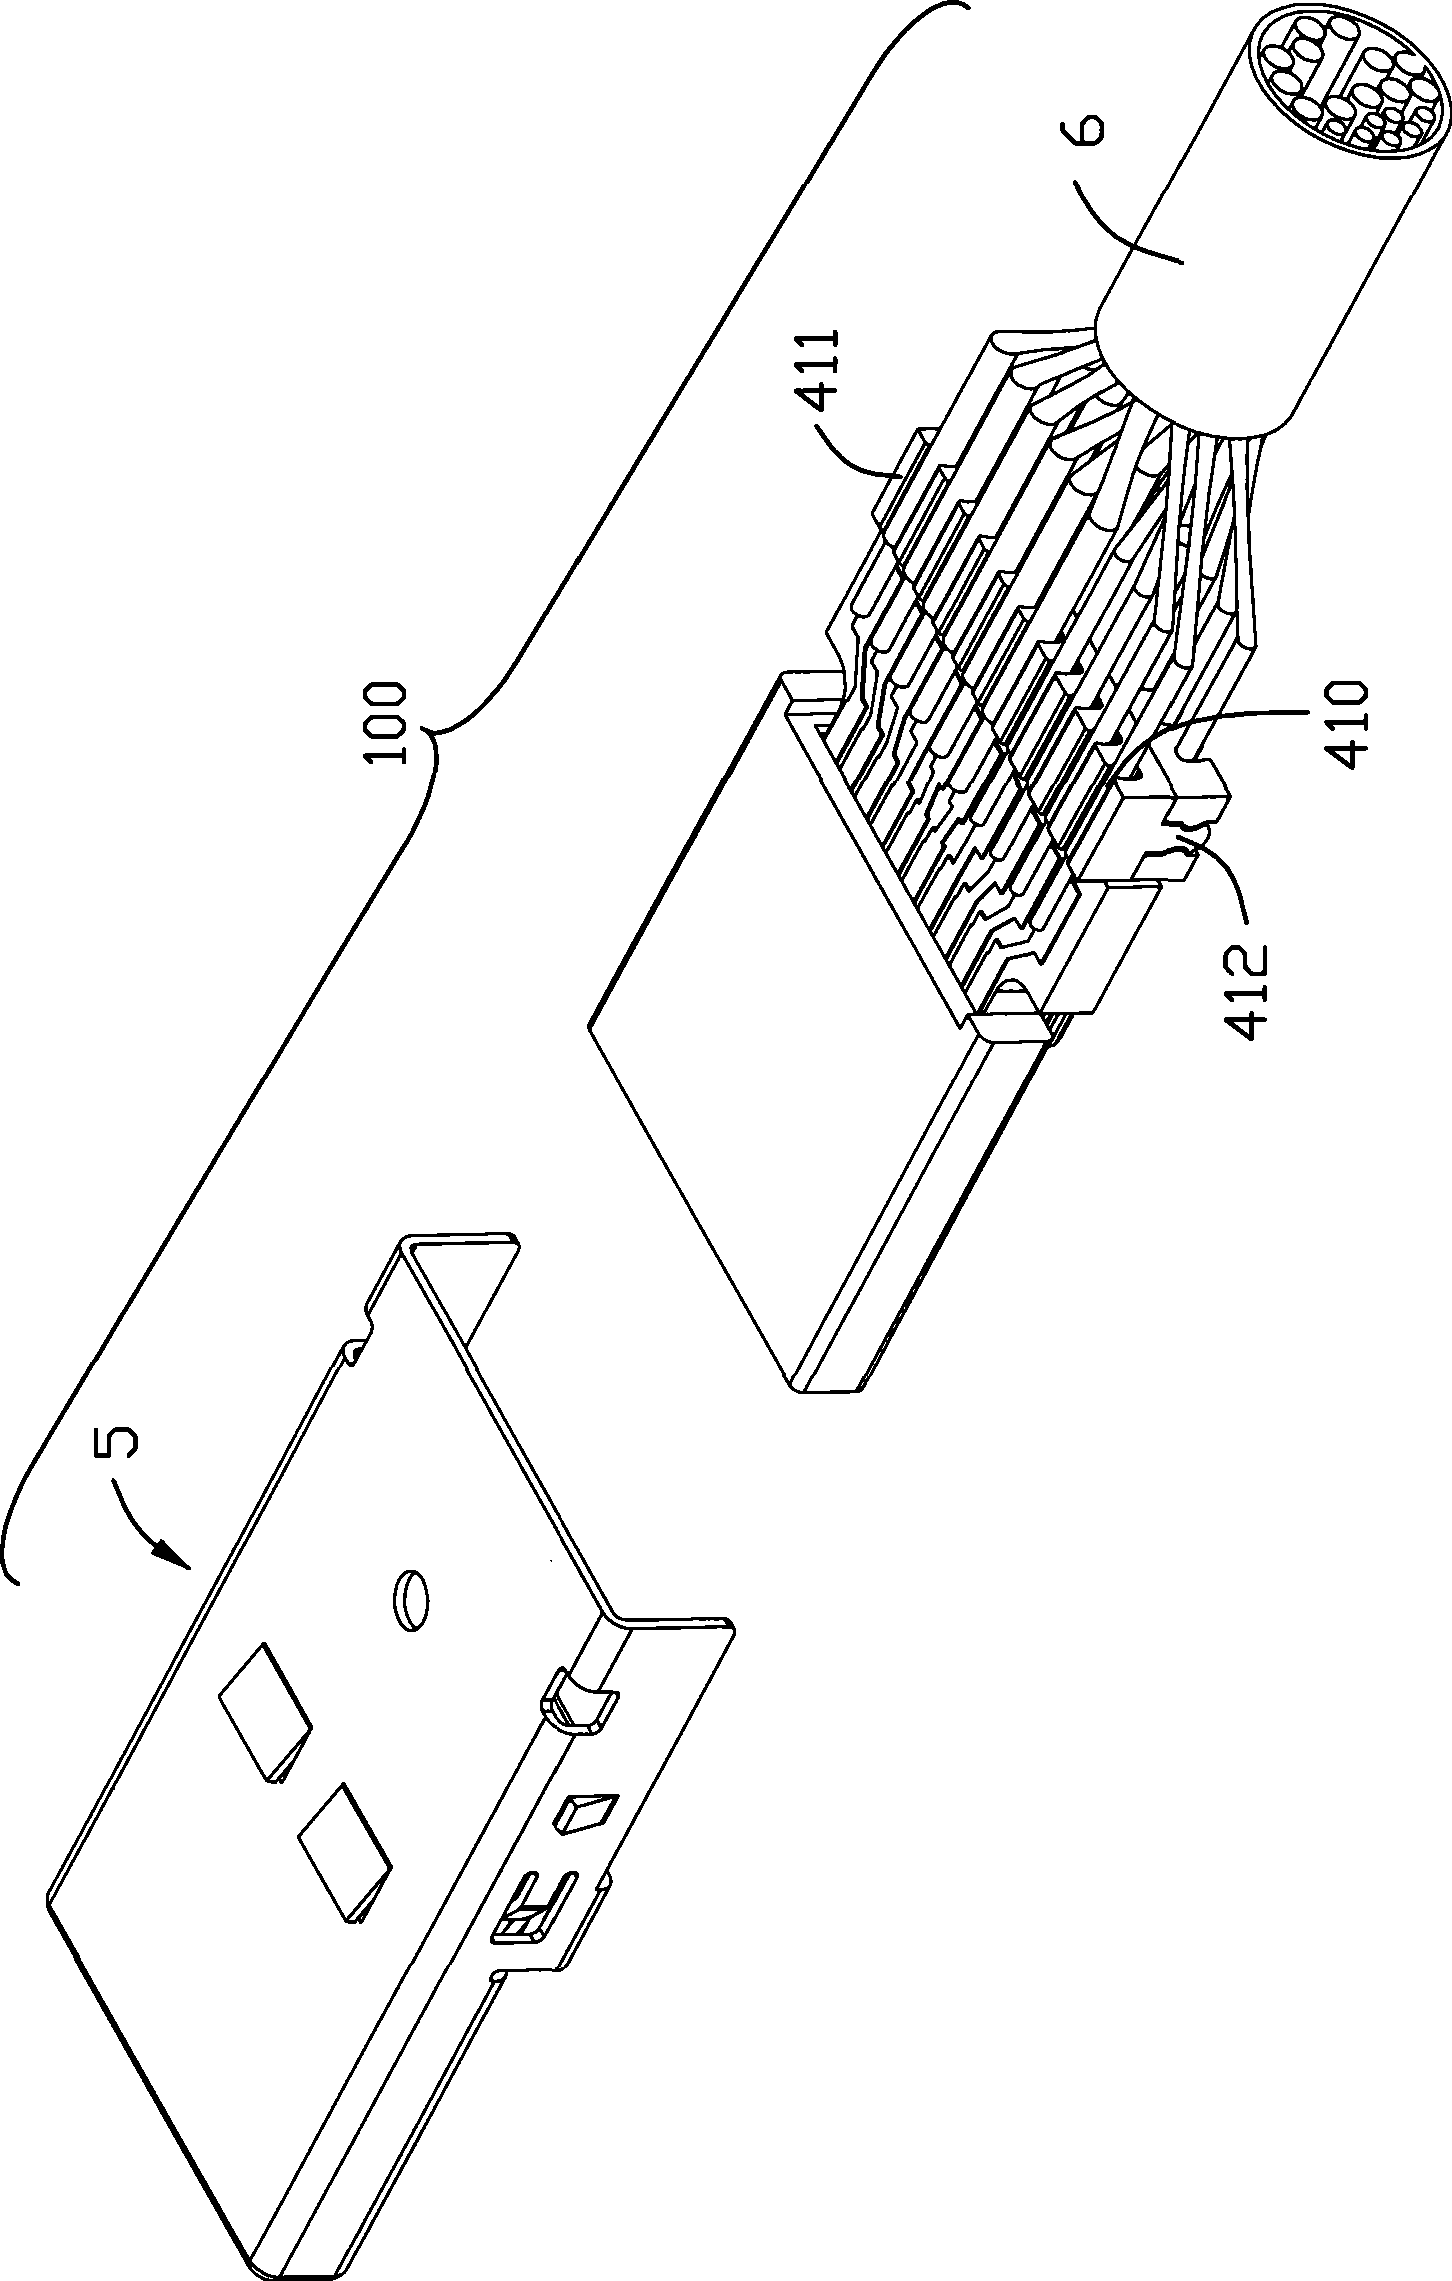 Cable connector assembly and method of making same